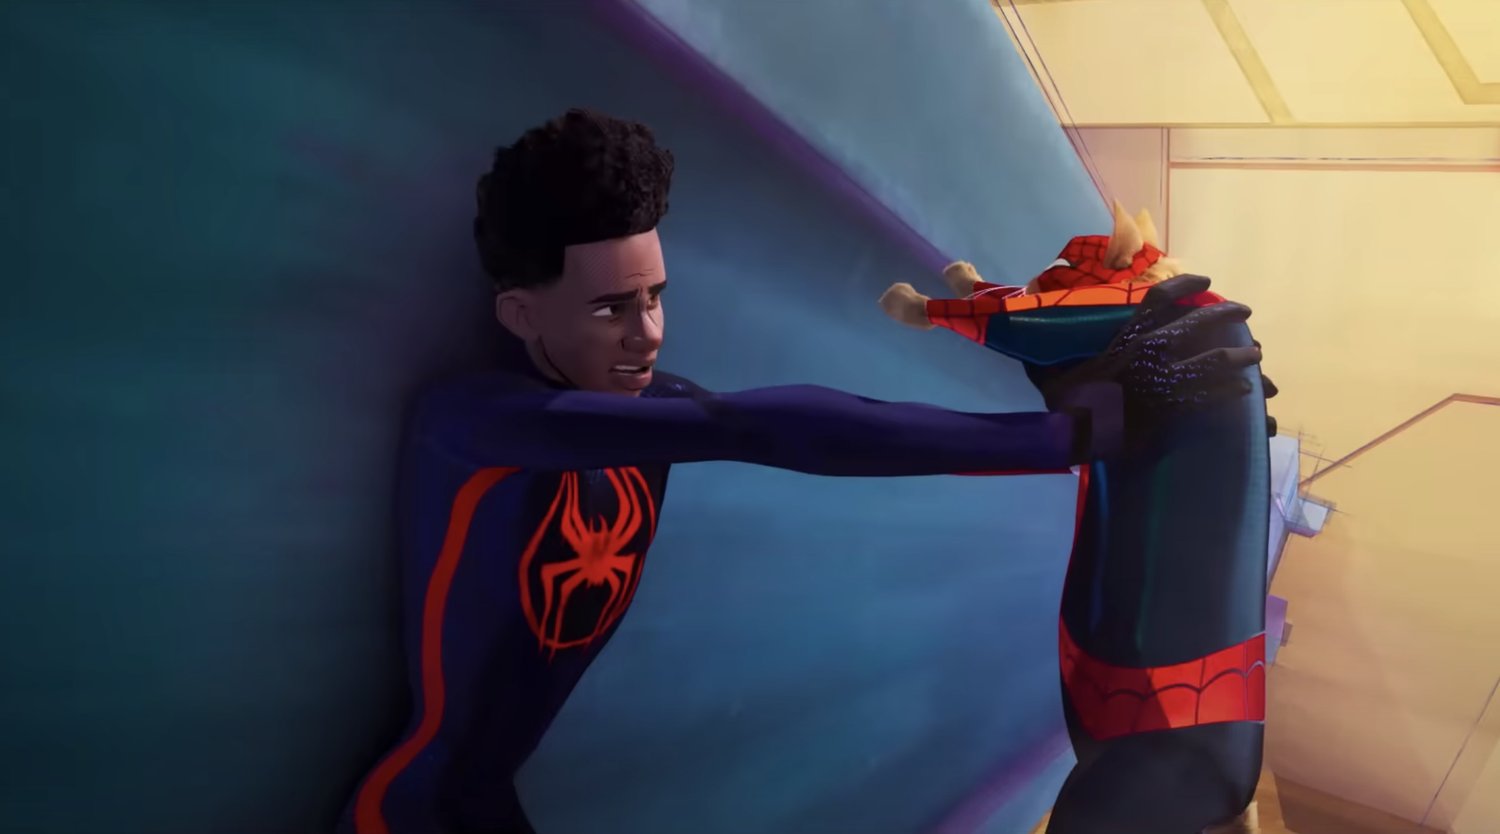 What Is The Spider-Society? Marvel Team & Spider-Verse Comic